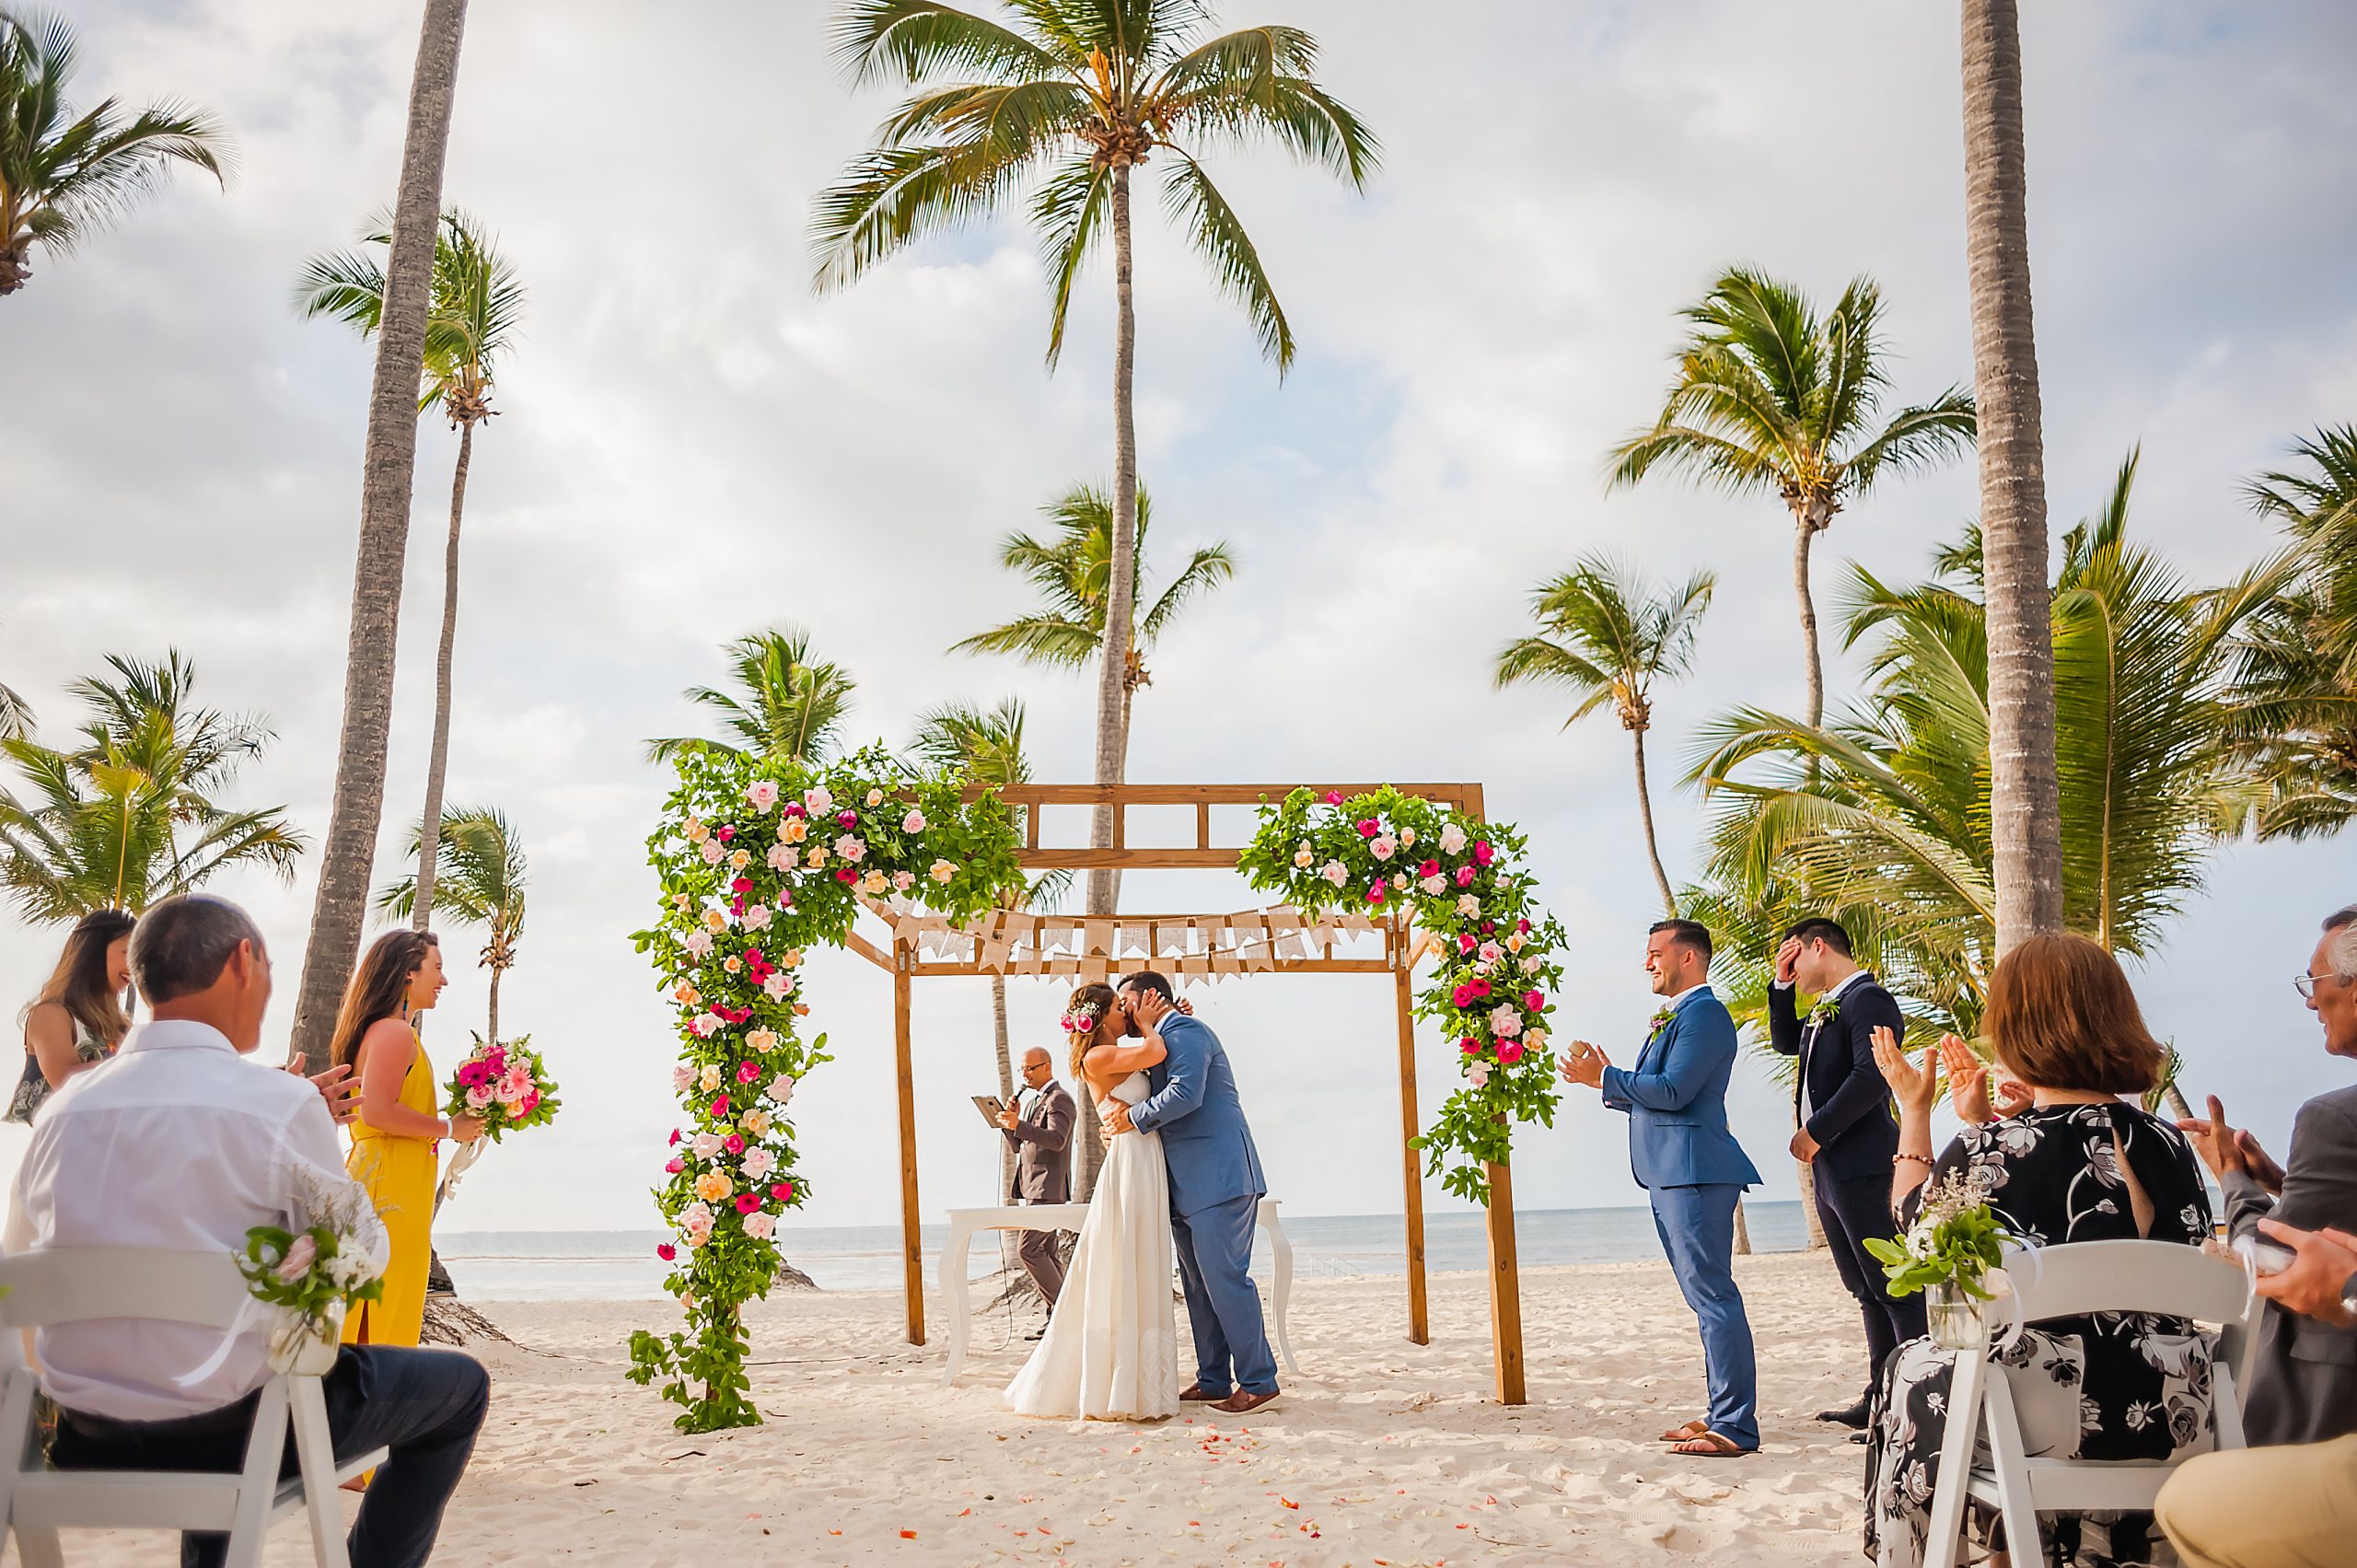 Destination wedding photography at the Pearl Resort in Punta Cana